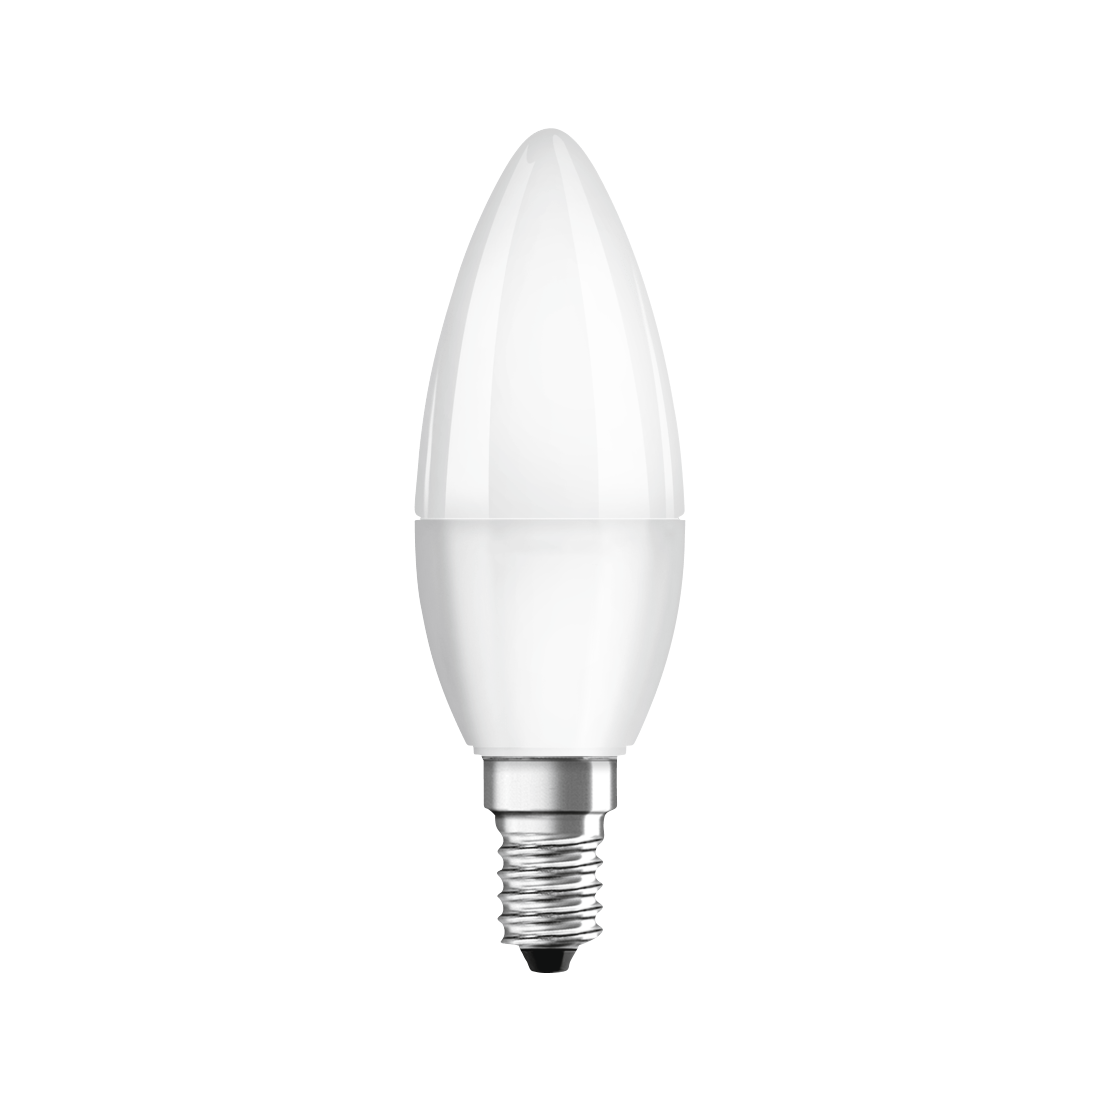 abx2 High-Res Image 2 - Xavax, LED Bulb, E14, 470 lm Replaces 40 W, Candle Bulb, warm white, 2 Pcs